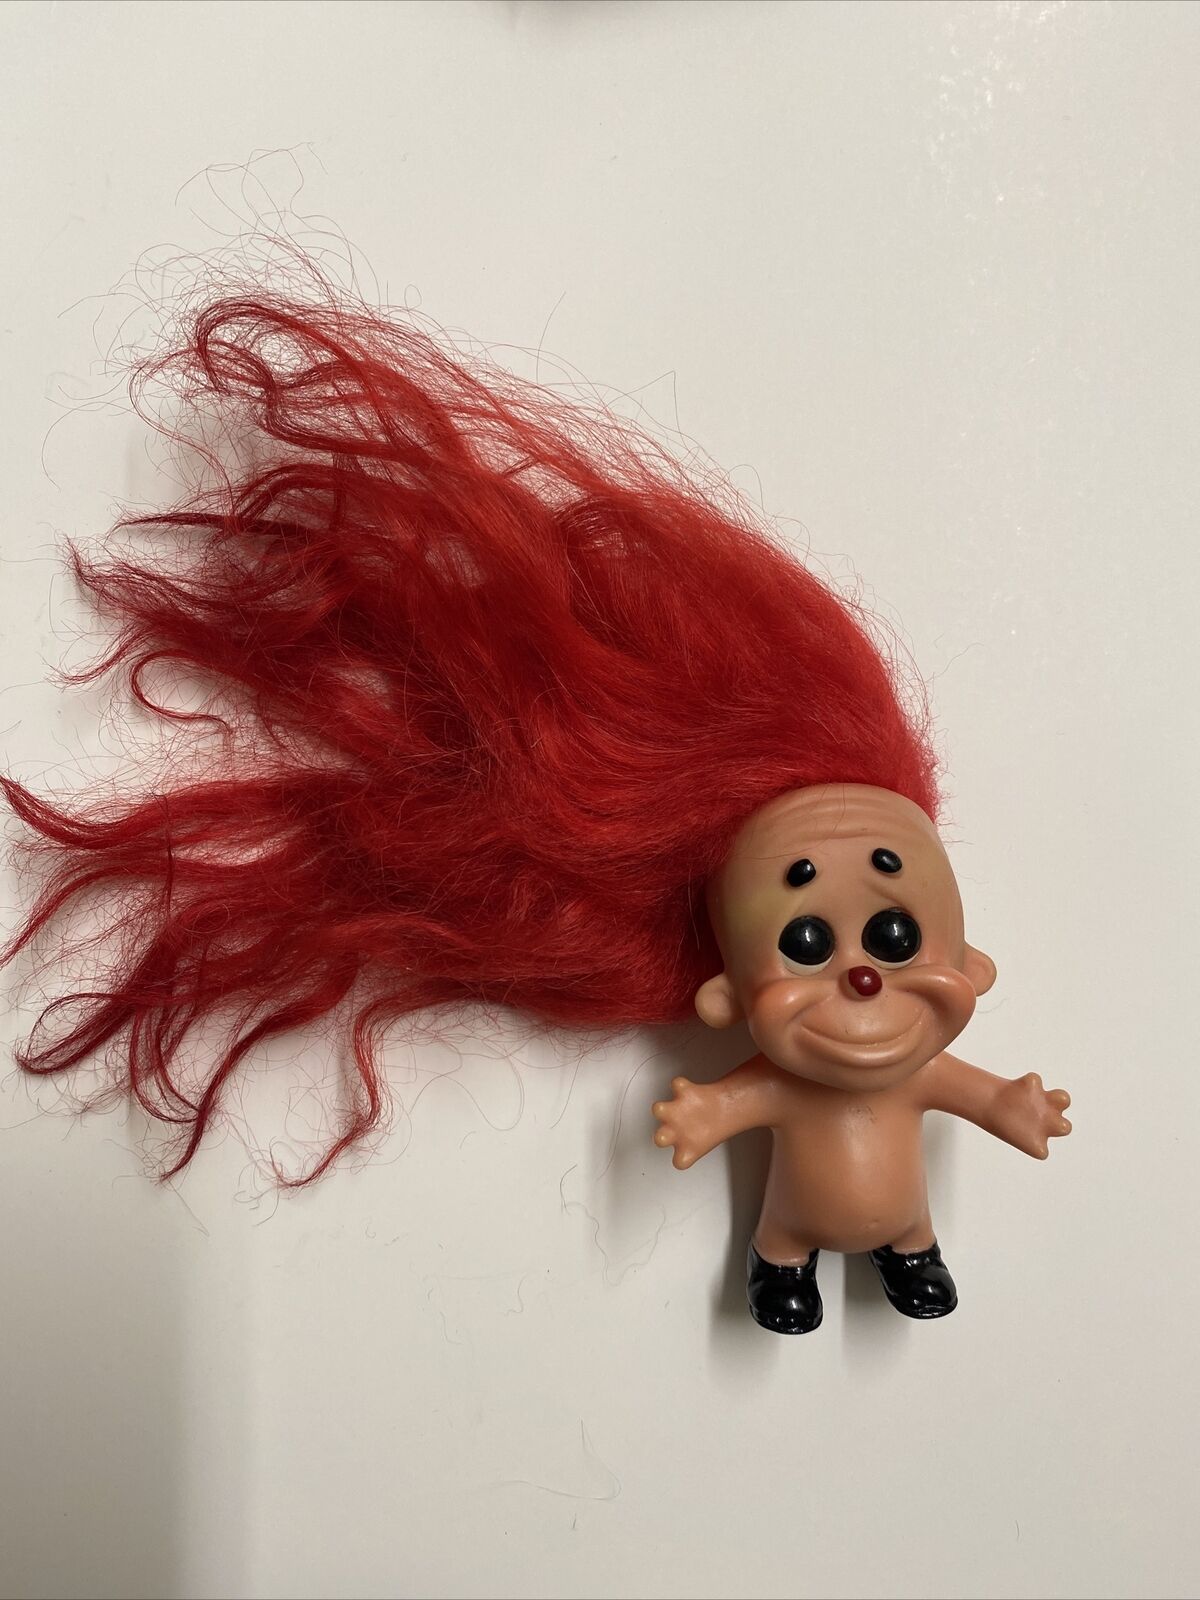 Vintage 1969 Roy Troll Doll Pink Hair Collectible 4”